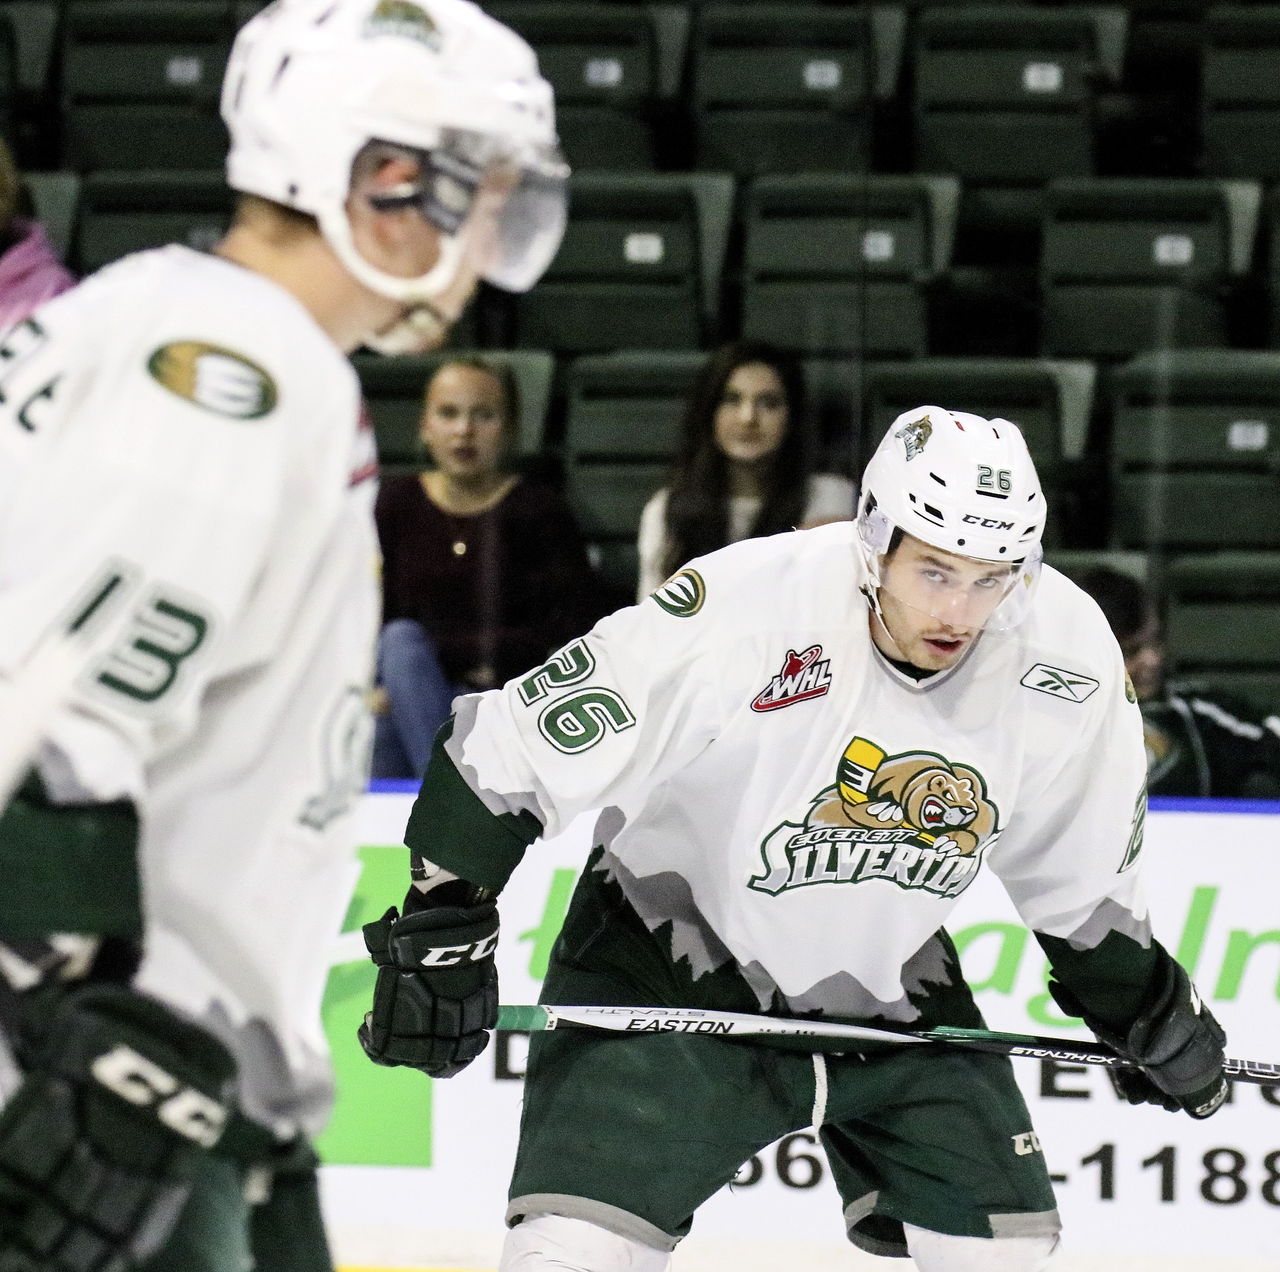 Silvertips overagers Cole MacDonald (right) and Remi Laurencelle await the faceoff during a game this past season at Xfinity Arena.